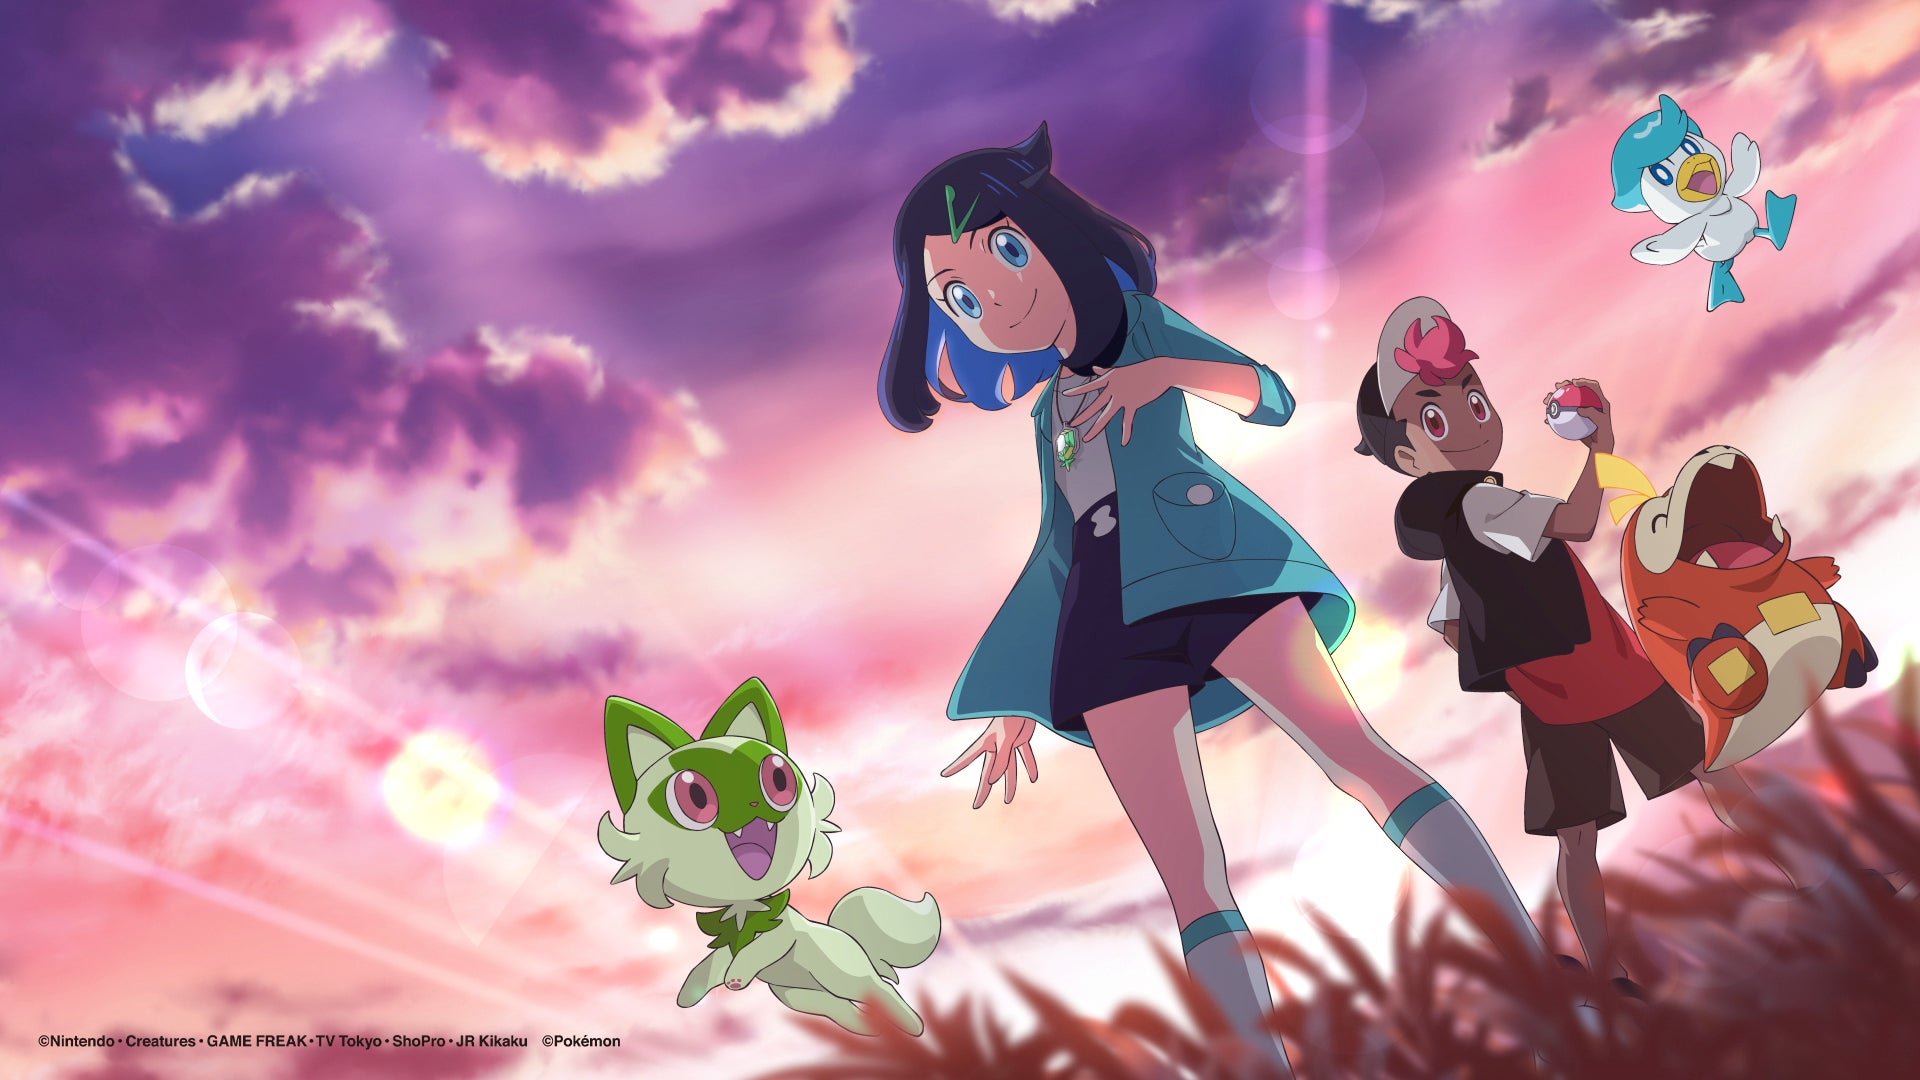 By passing the torch, Pokémon is opening the anime to new stories. (Image: The Pokémon Company)